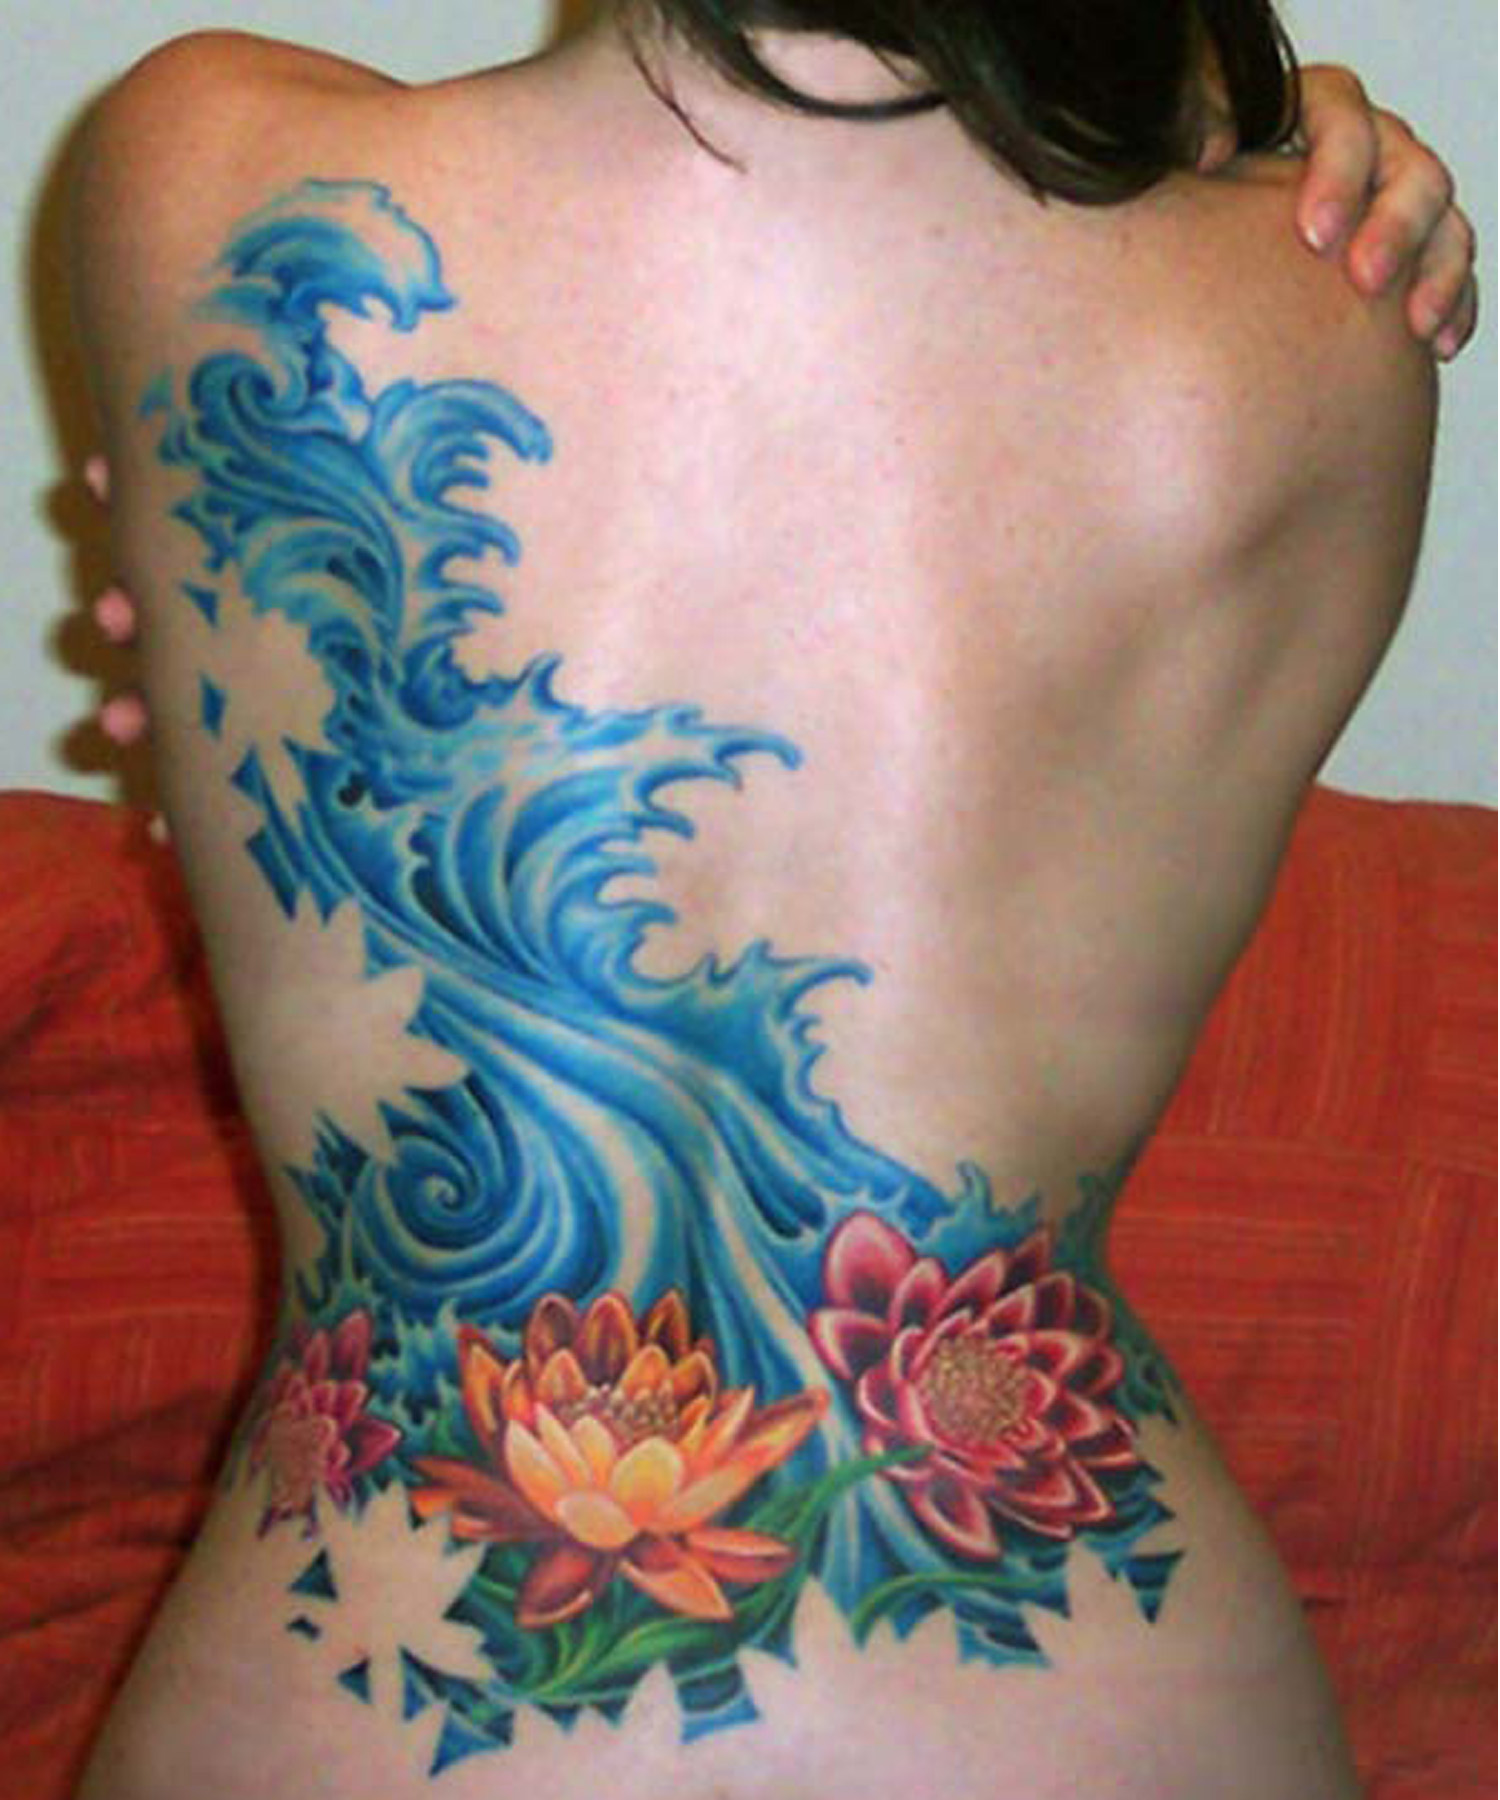 It grow with fascinate tattoos